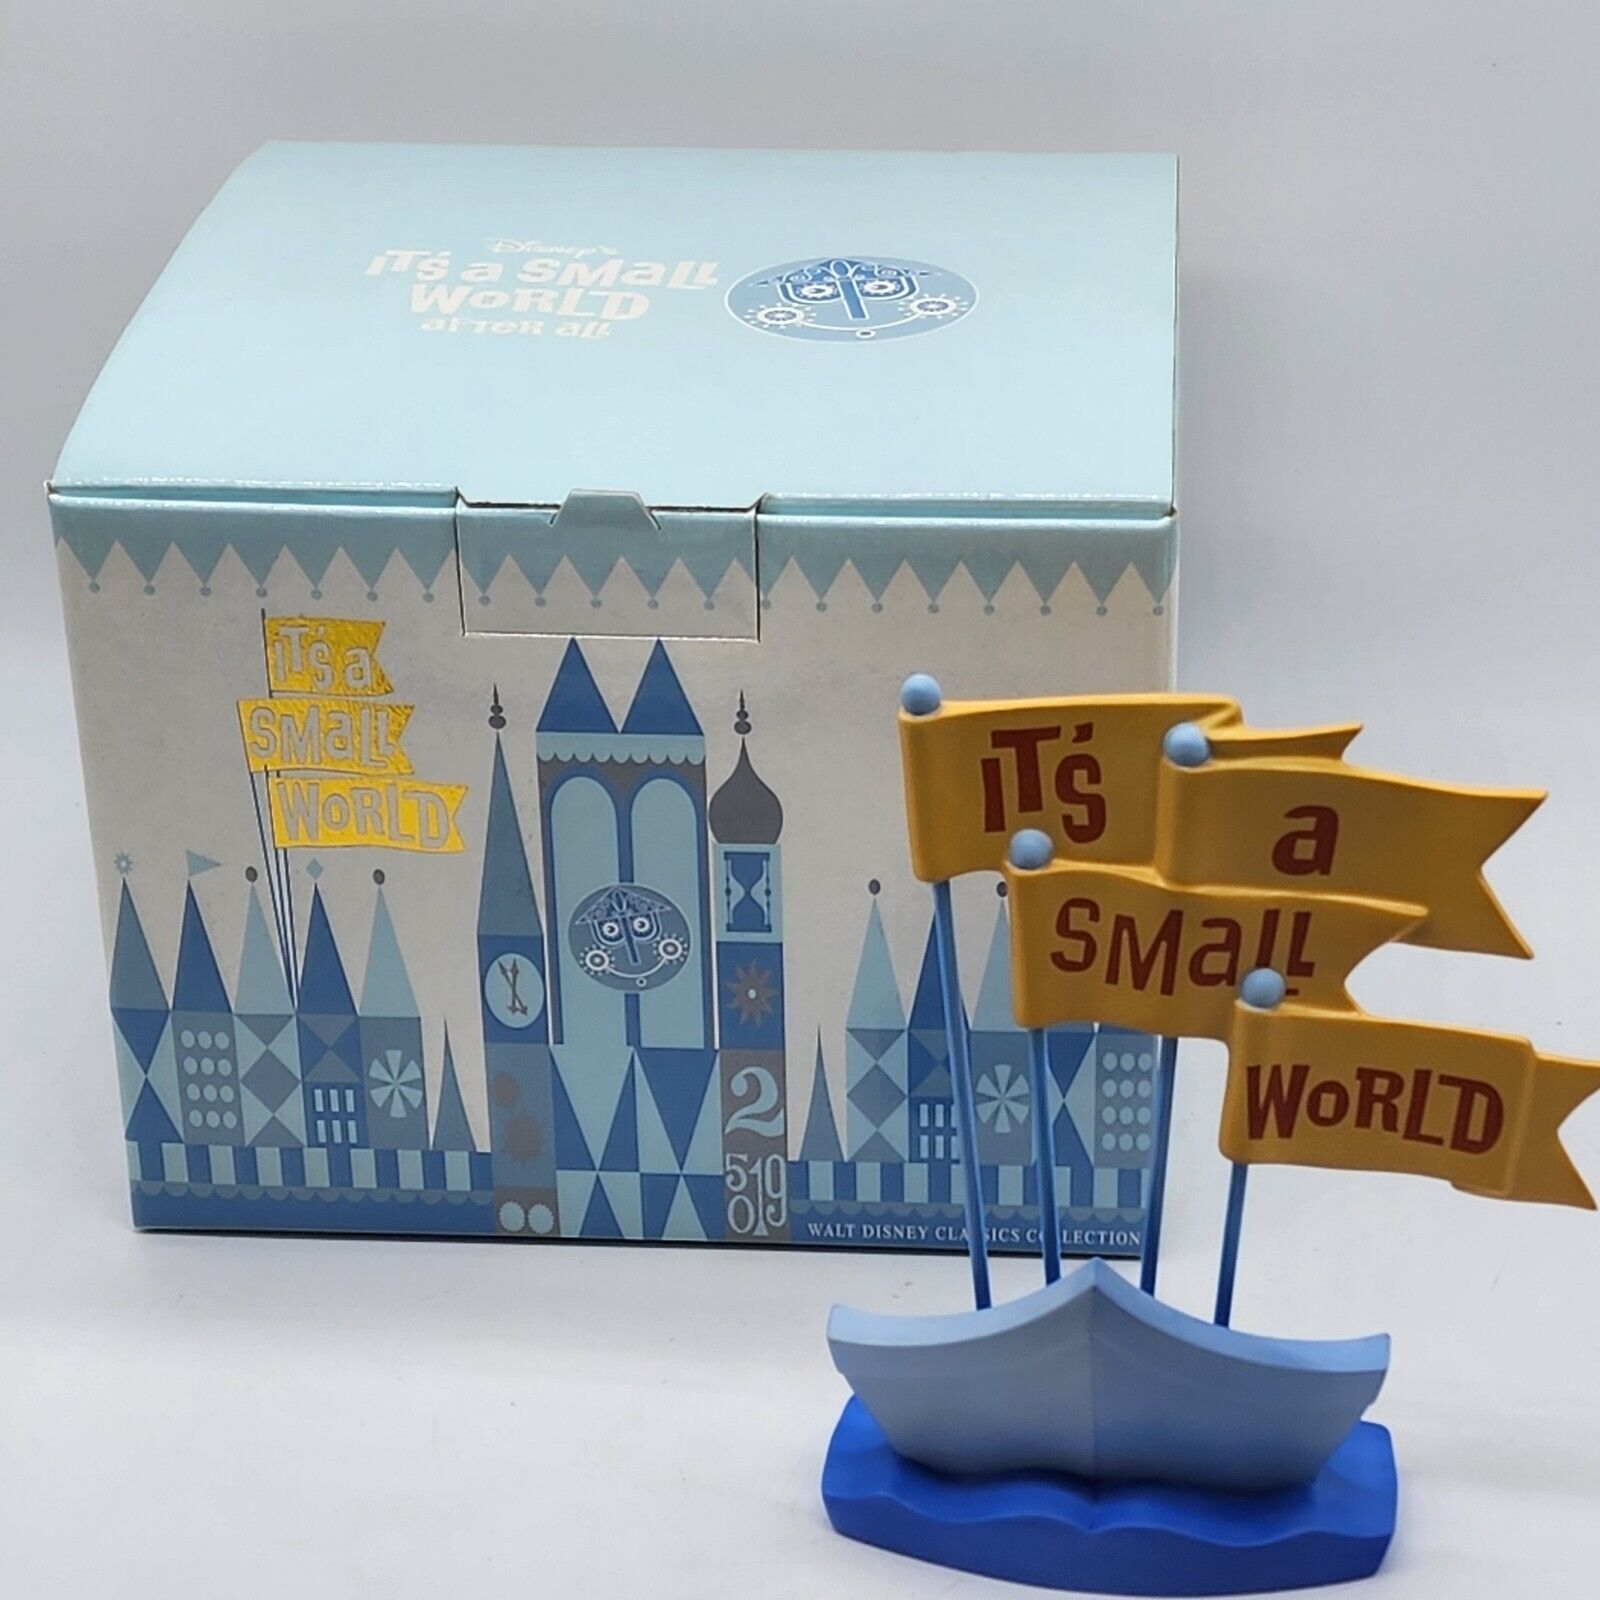 ITS A SMALL WORLD Walt Disney Classics Collection WDCC FLAGSHIP Porcelain